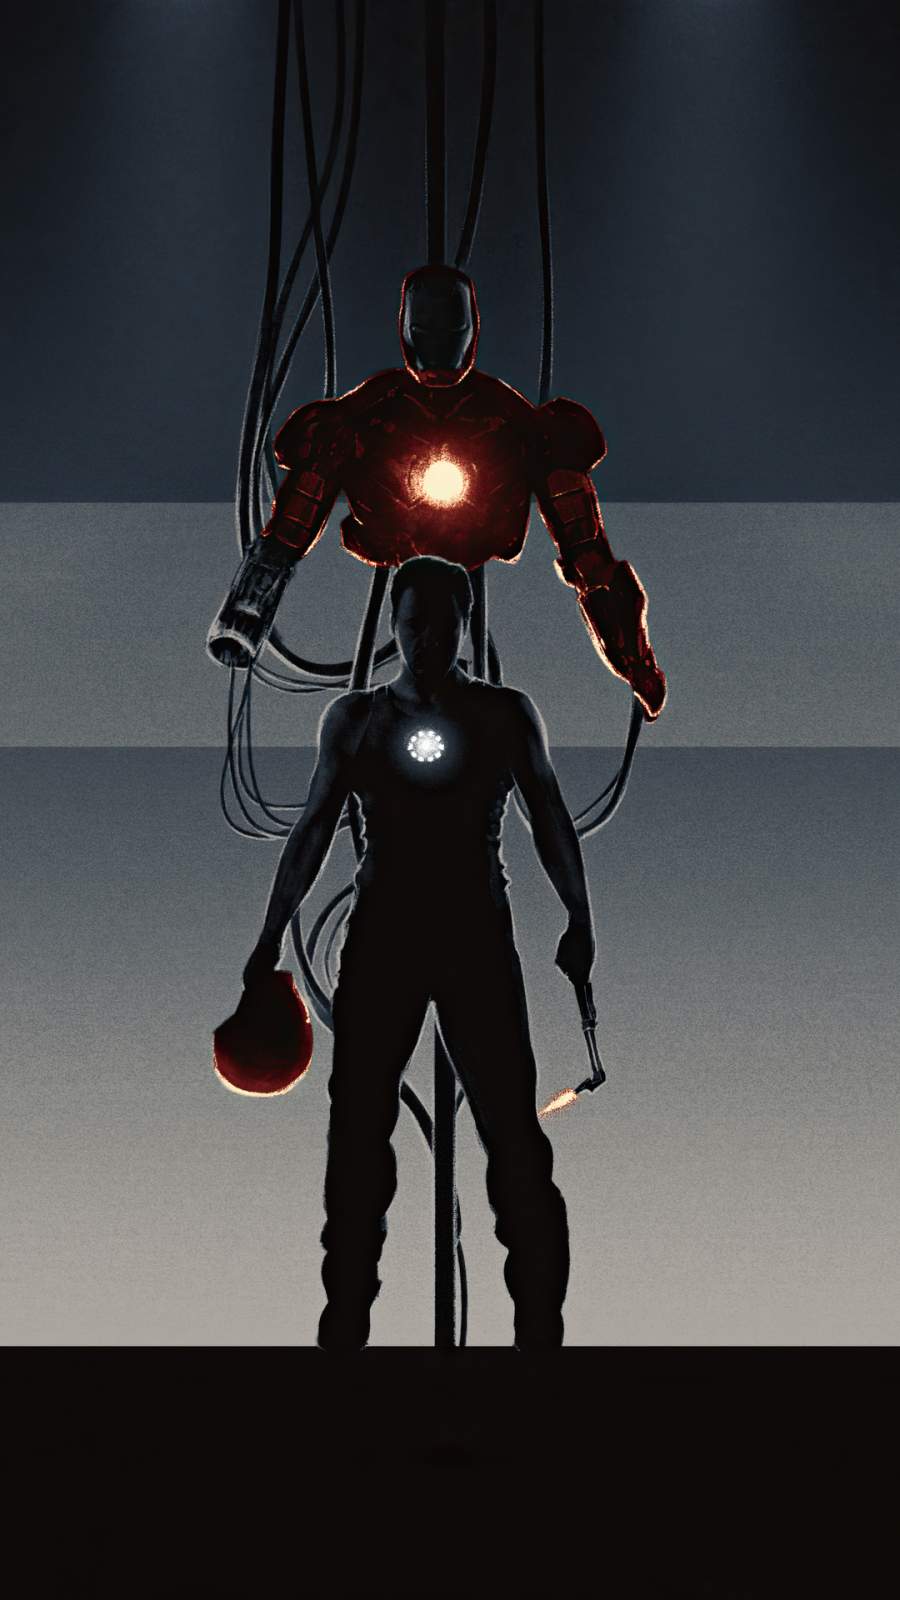 The Iron Man - IPhone Wallpapers : iPhone Wallpapers